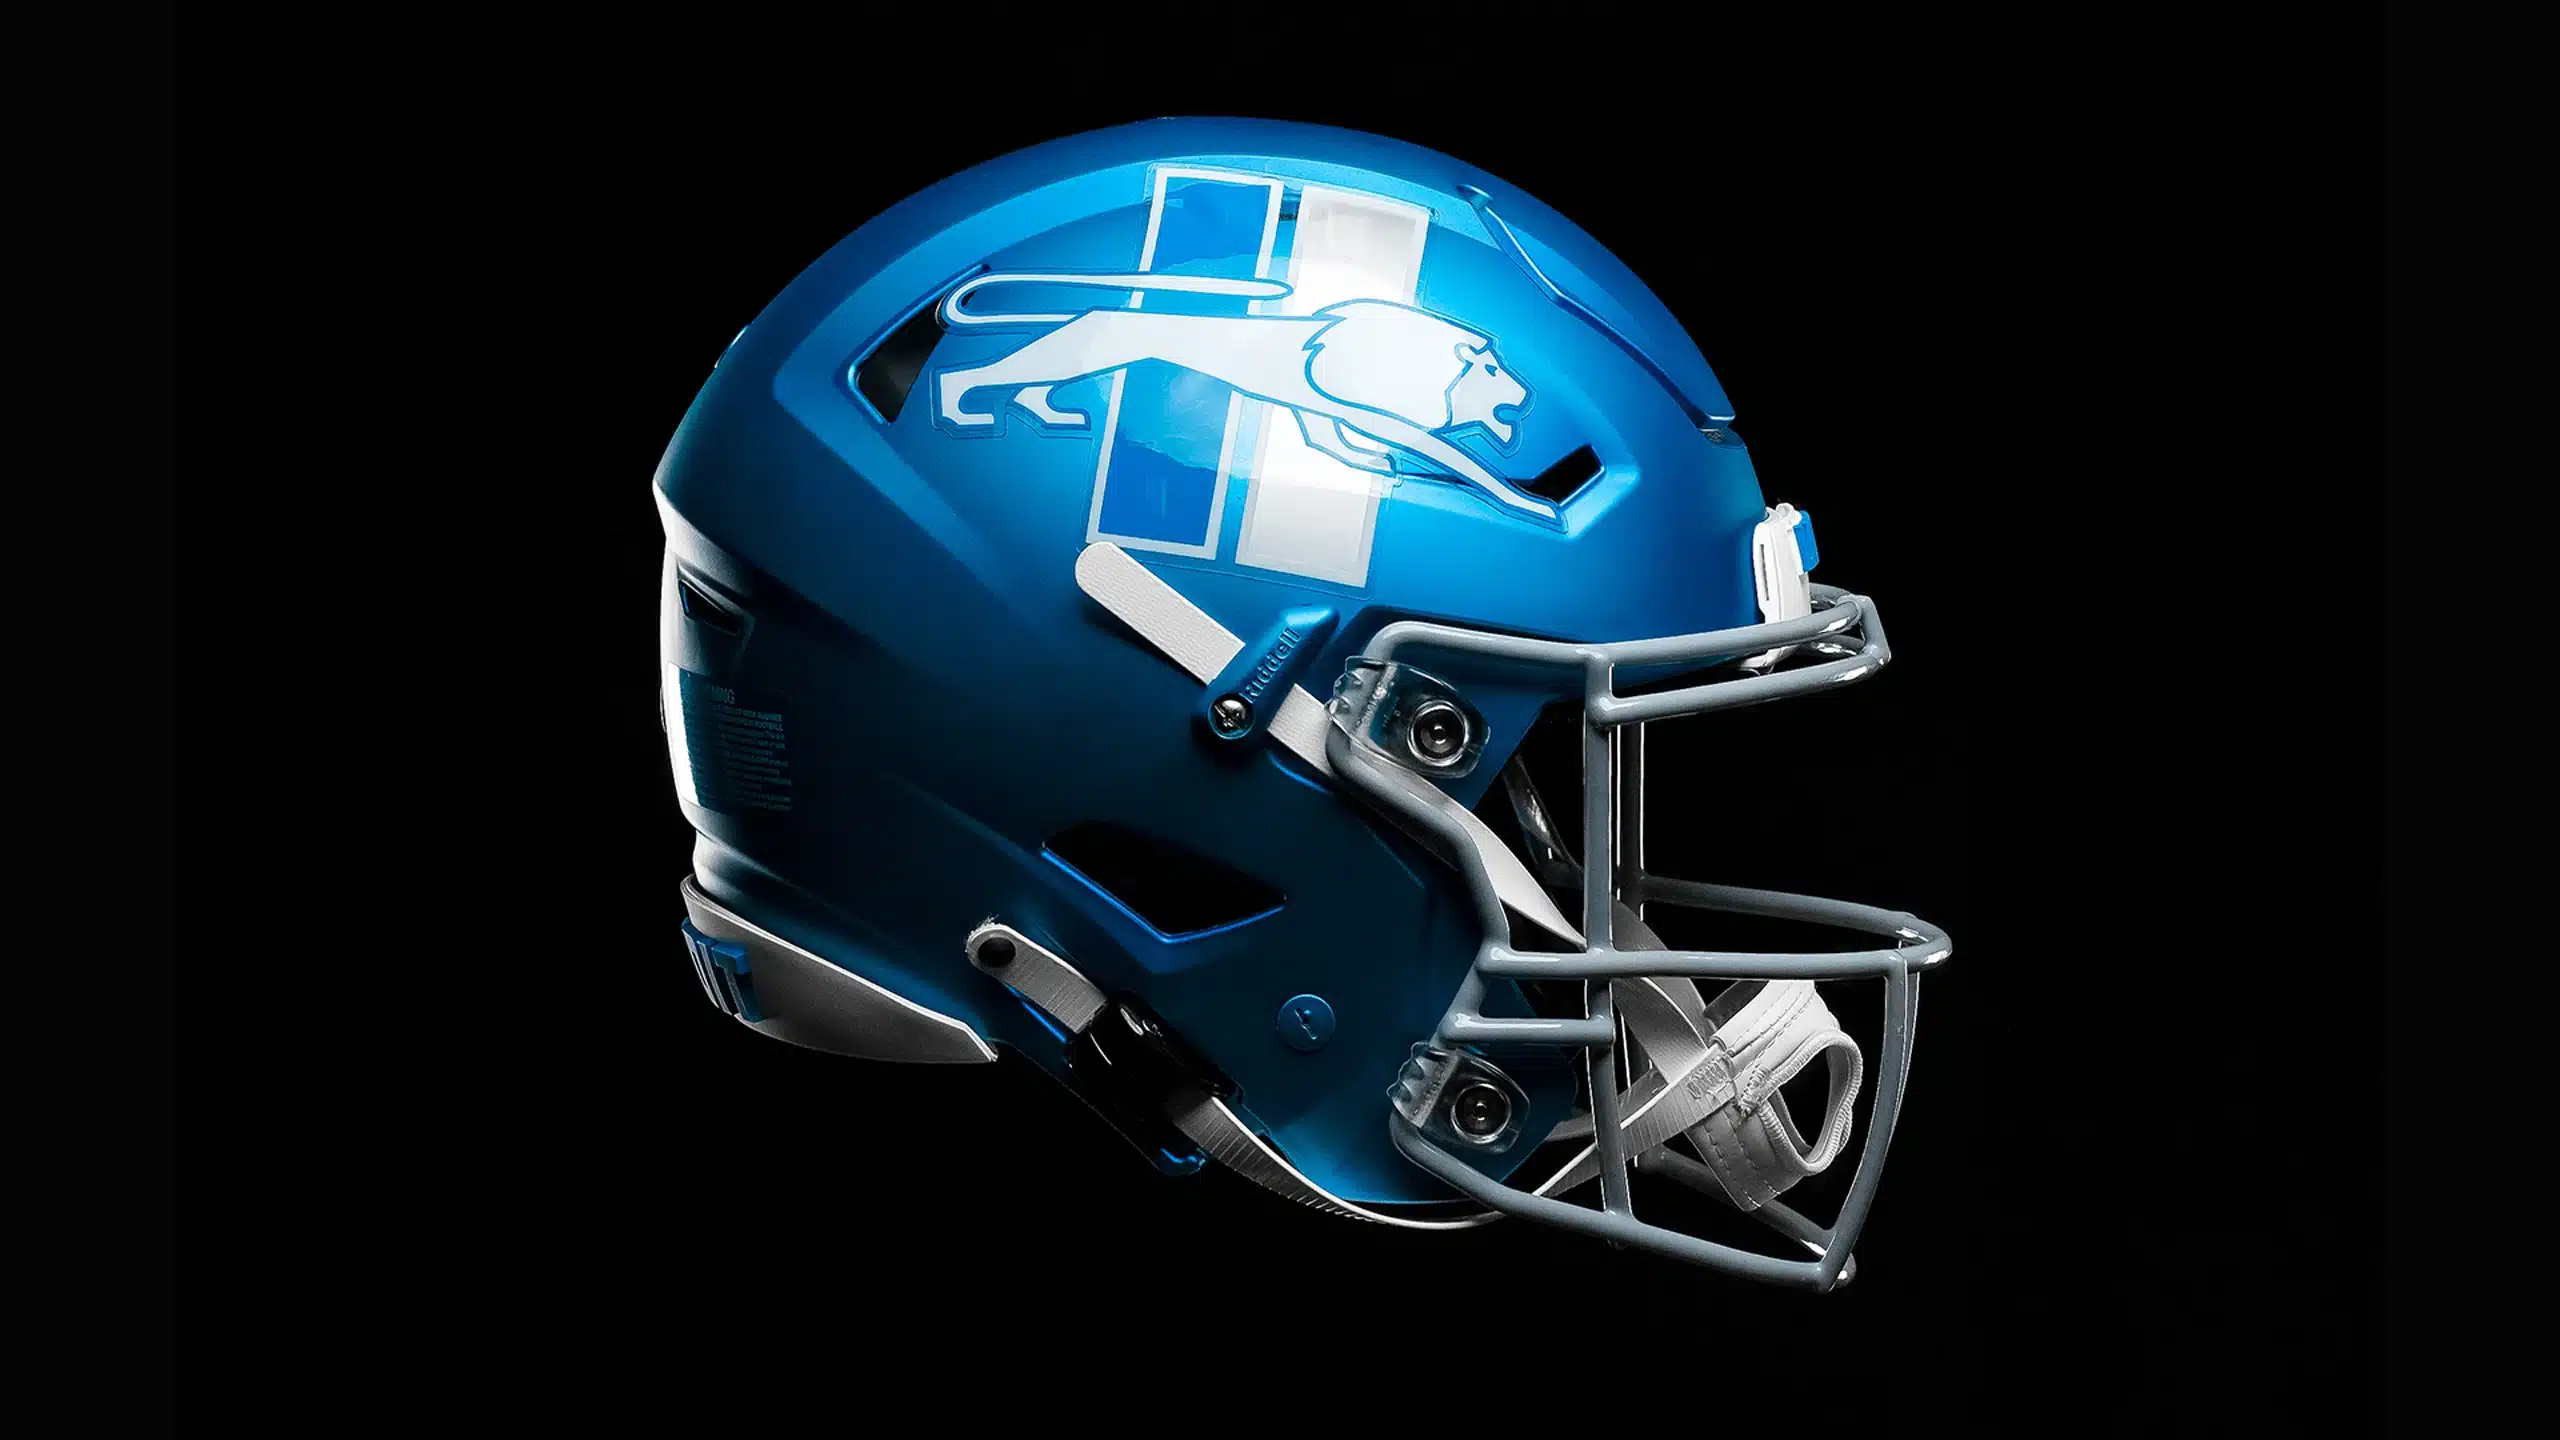 2023 Detroit Lions Alternate Helmet 2023 Detroit Lions Training Camp Brad Holmes Justin Jackson Dan Campbell C.J. Gardner Johnson 2023 Detroit Lions 53-man roster Shane Zylstra Dylan Drummond Avery Davis Bobby Hart Detroit Lions vs. New York Giants Detroit Lions to sign Jason Moore Detroit Lions Expand Gameday Radio Coverage for 2023 Detroit Lions change jersey numbers 2023 Detroit Lions Team Captains Lions' Win Benito Jones wearing questionable outfit